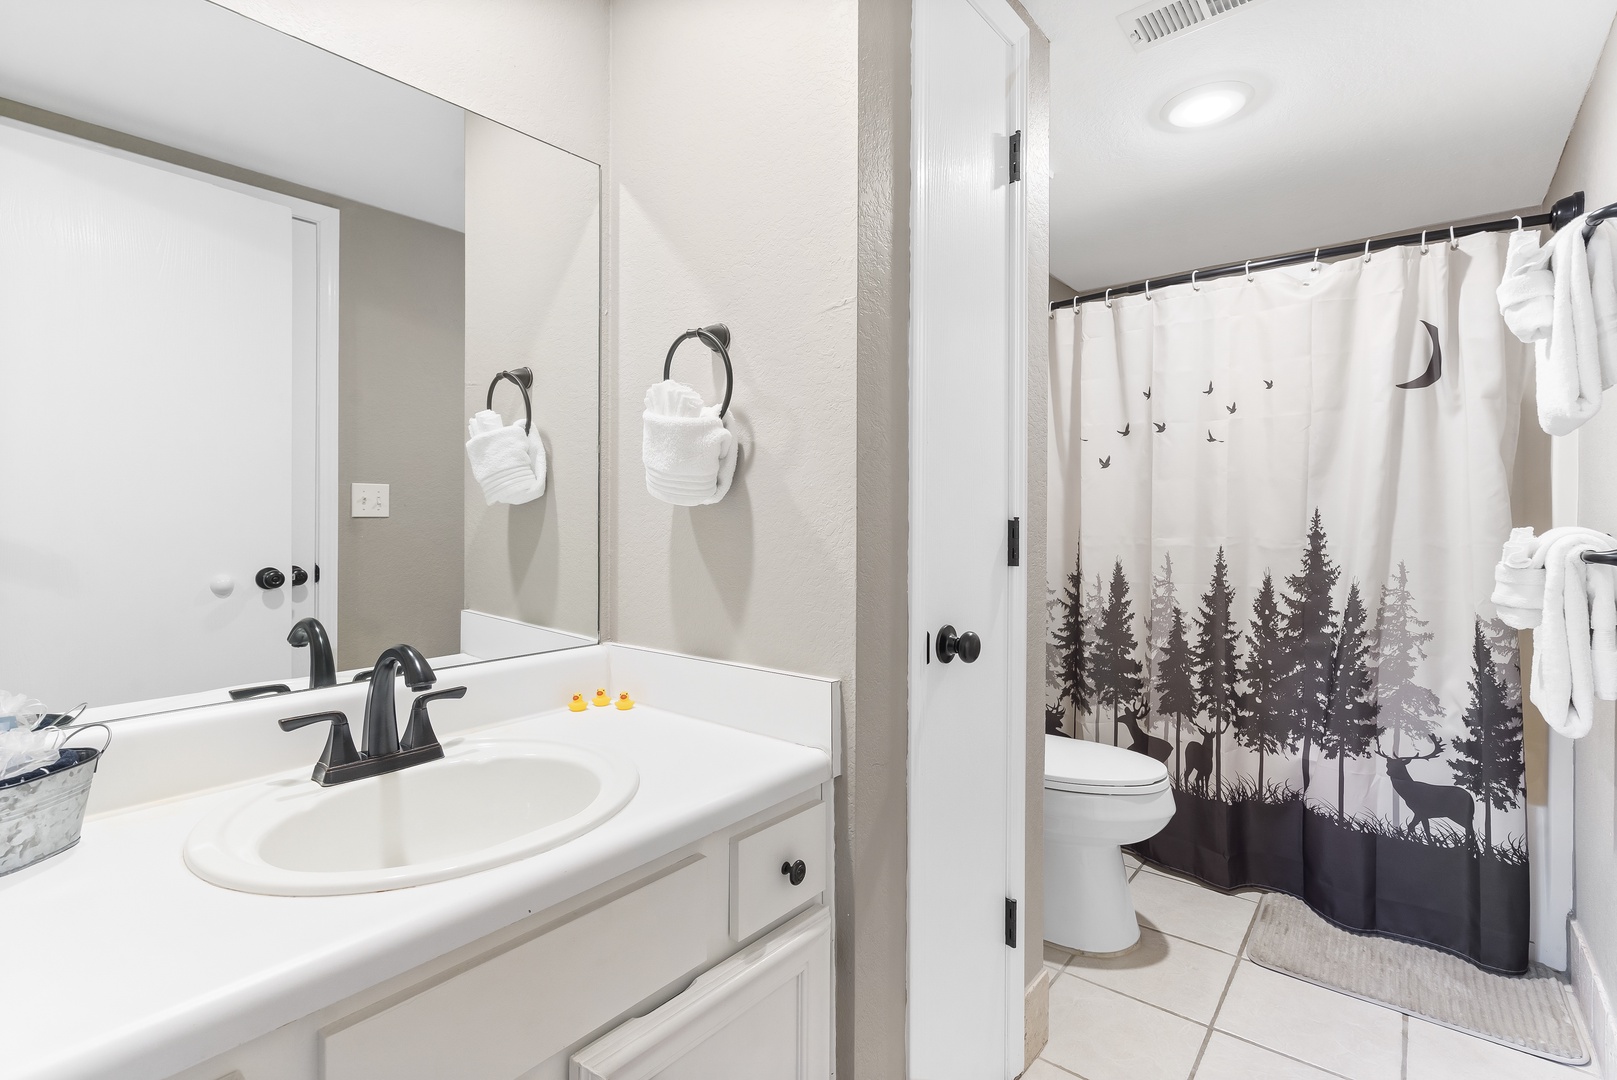 This ensuite links to the living area, featuring a single vanity & shower/tub combo